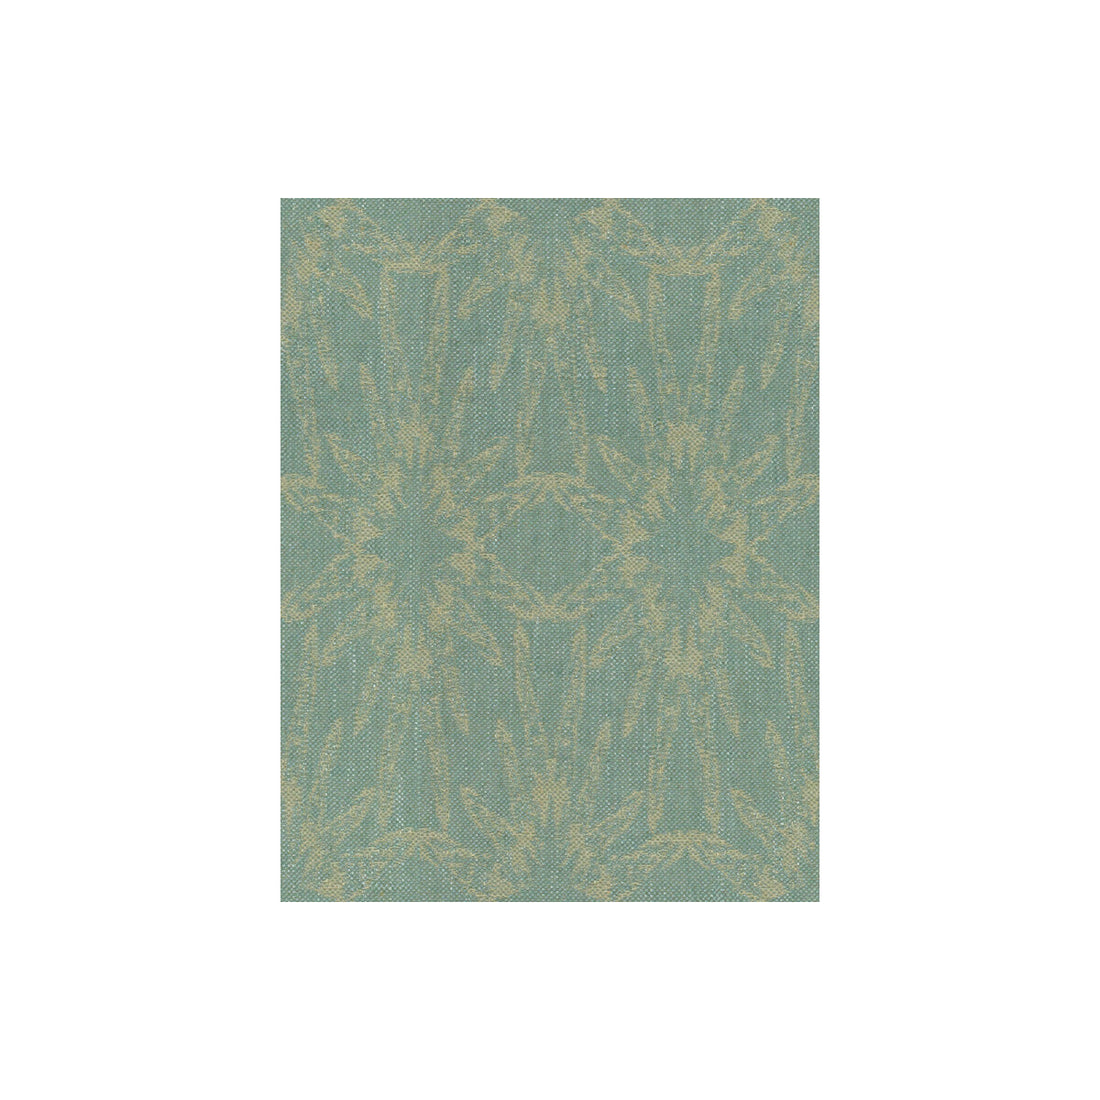 Starfish fabric in aqua color - pattern GWF-3202.13.0 - by Lee Jofa Modern in the Allegra Hicks Islands collection